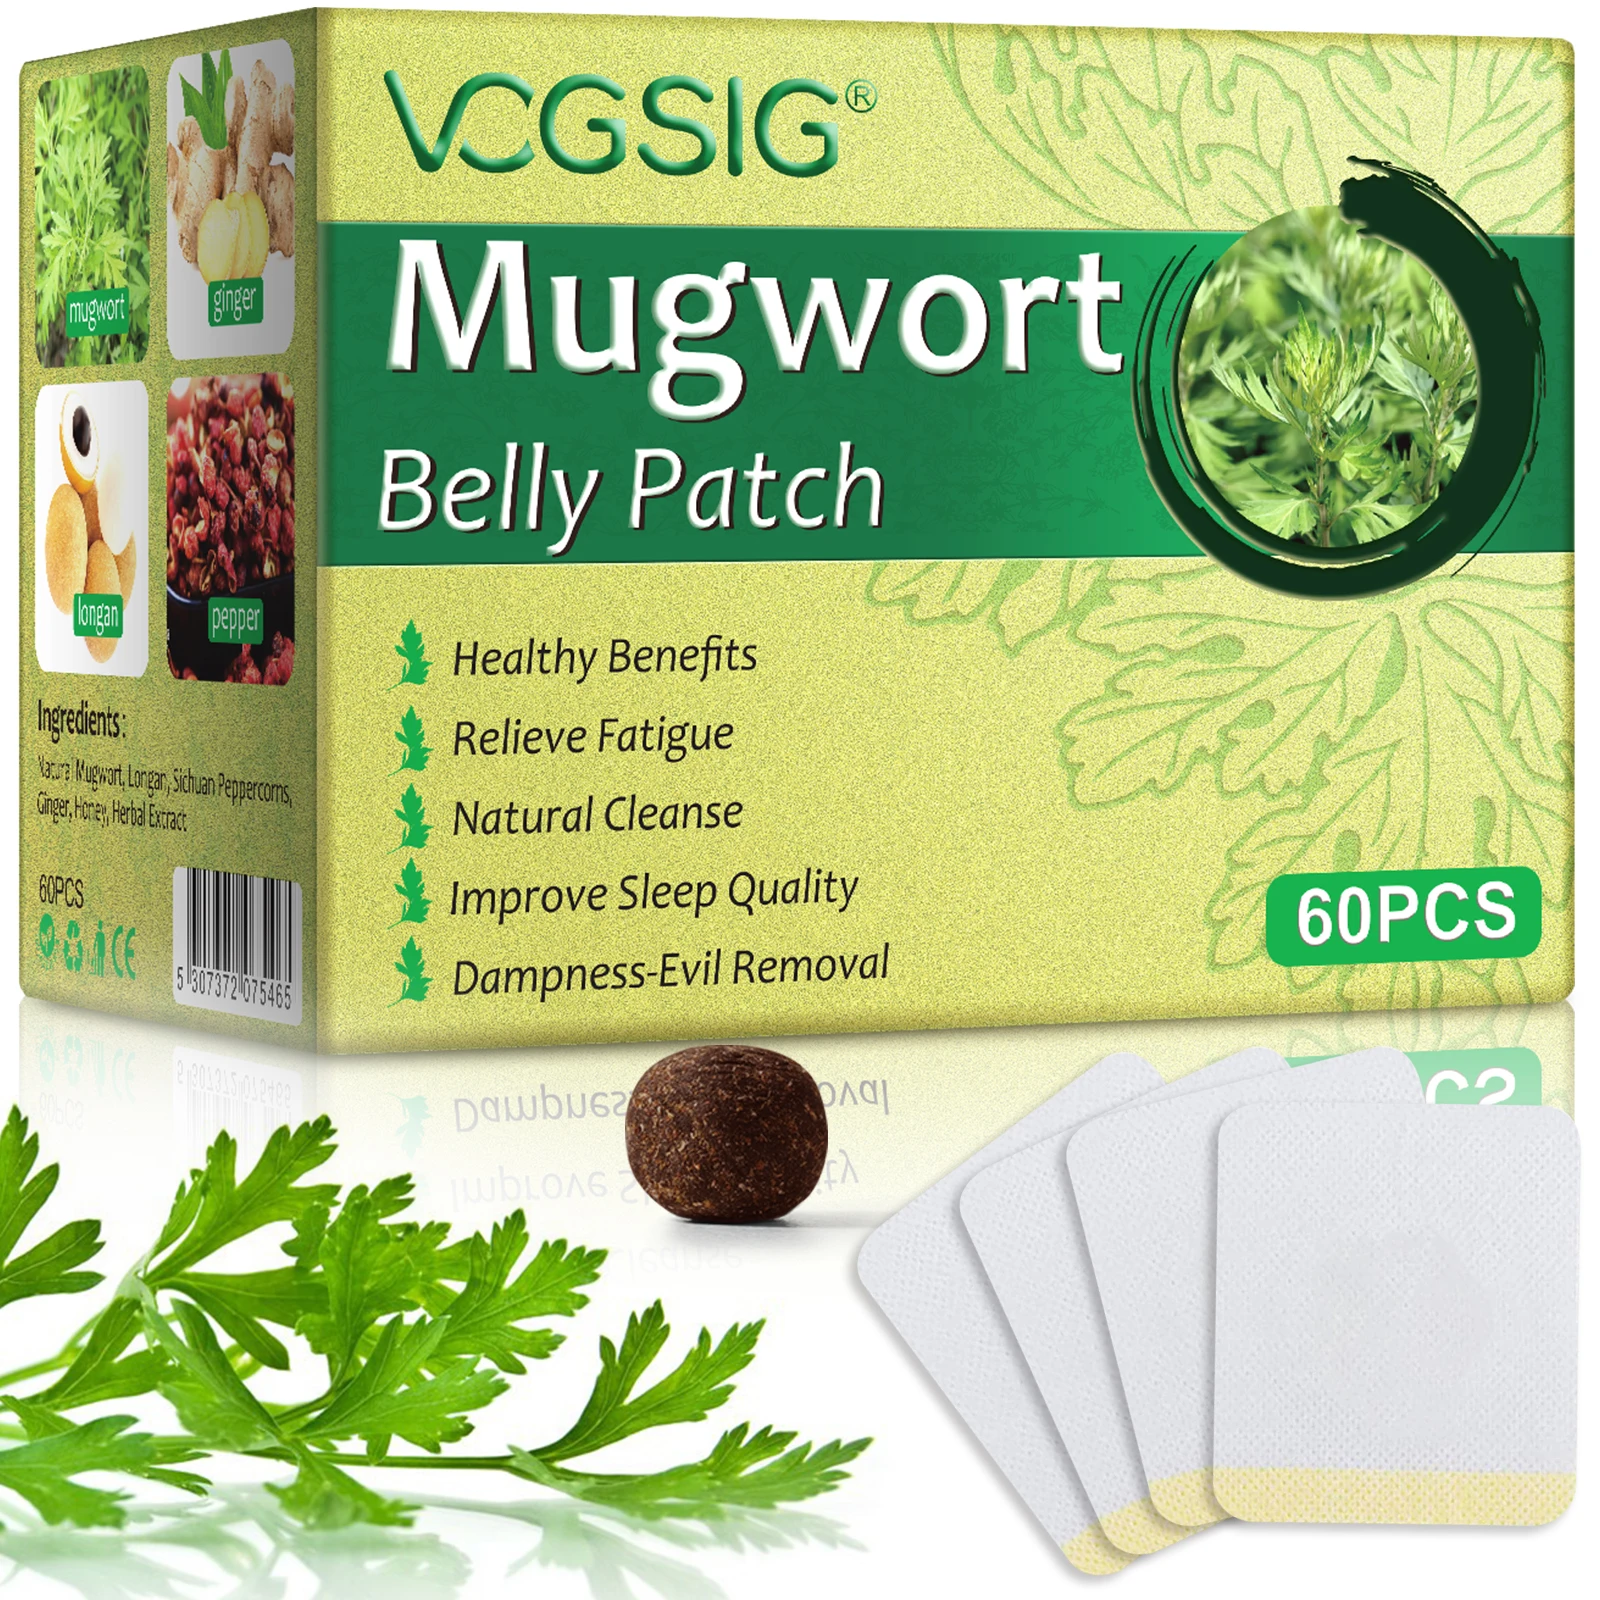 

VOGSIG 60 Pcs Chinese Herbs Healthy Detox Relieve Fatigue Wormwood Navel Slimming Mugwort Belly Button Patch